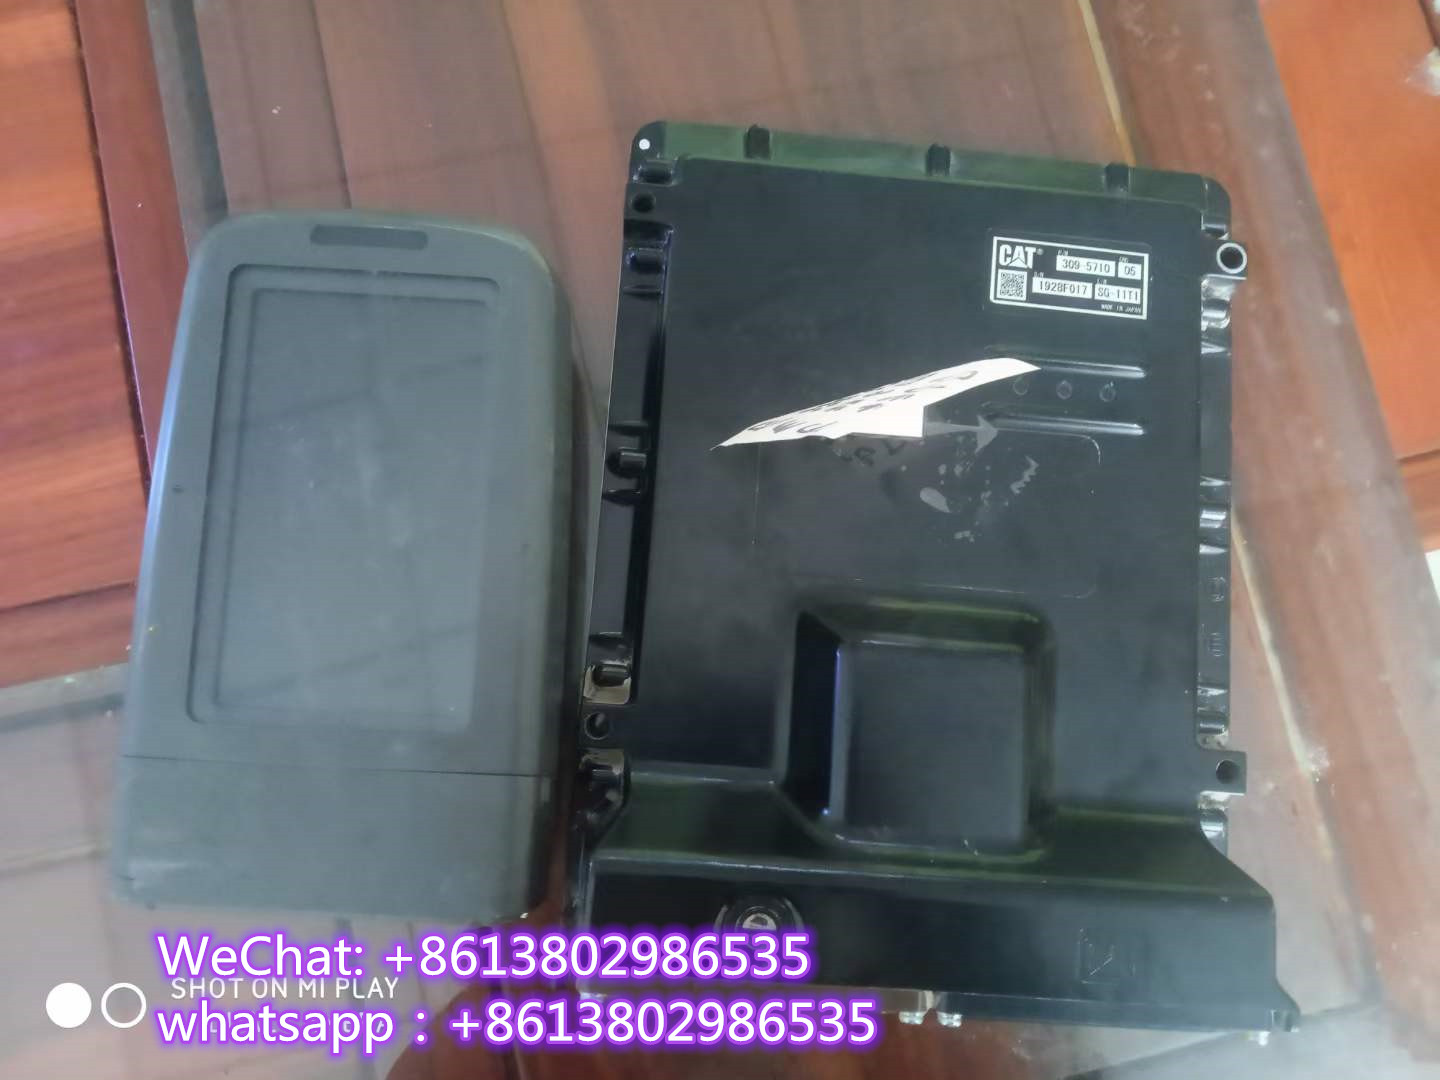 Engine Monitor 7834-70-6002 Display Screen Excavator Monitor For PC200-6 Excavator parts